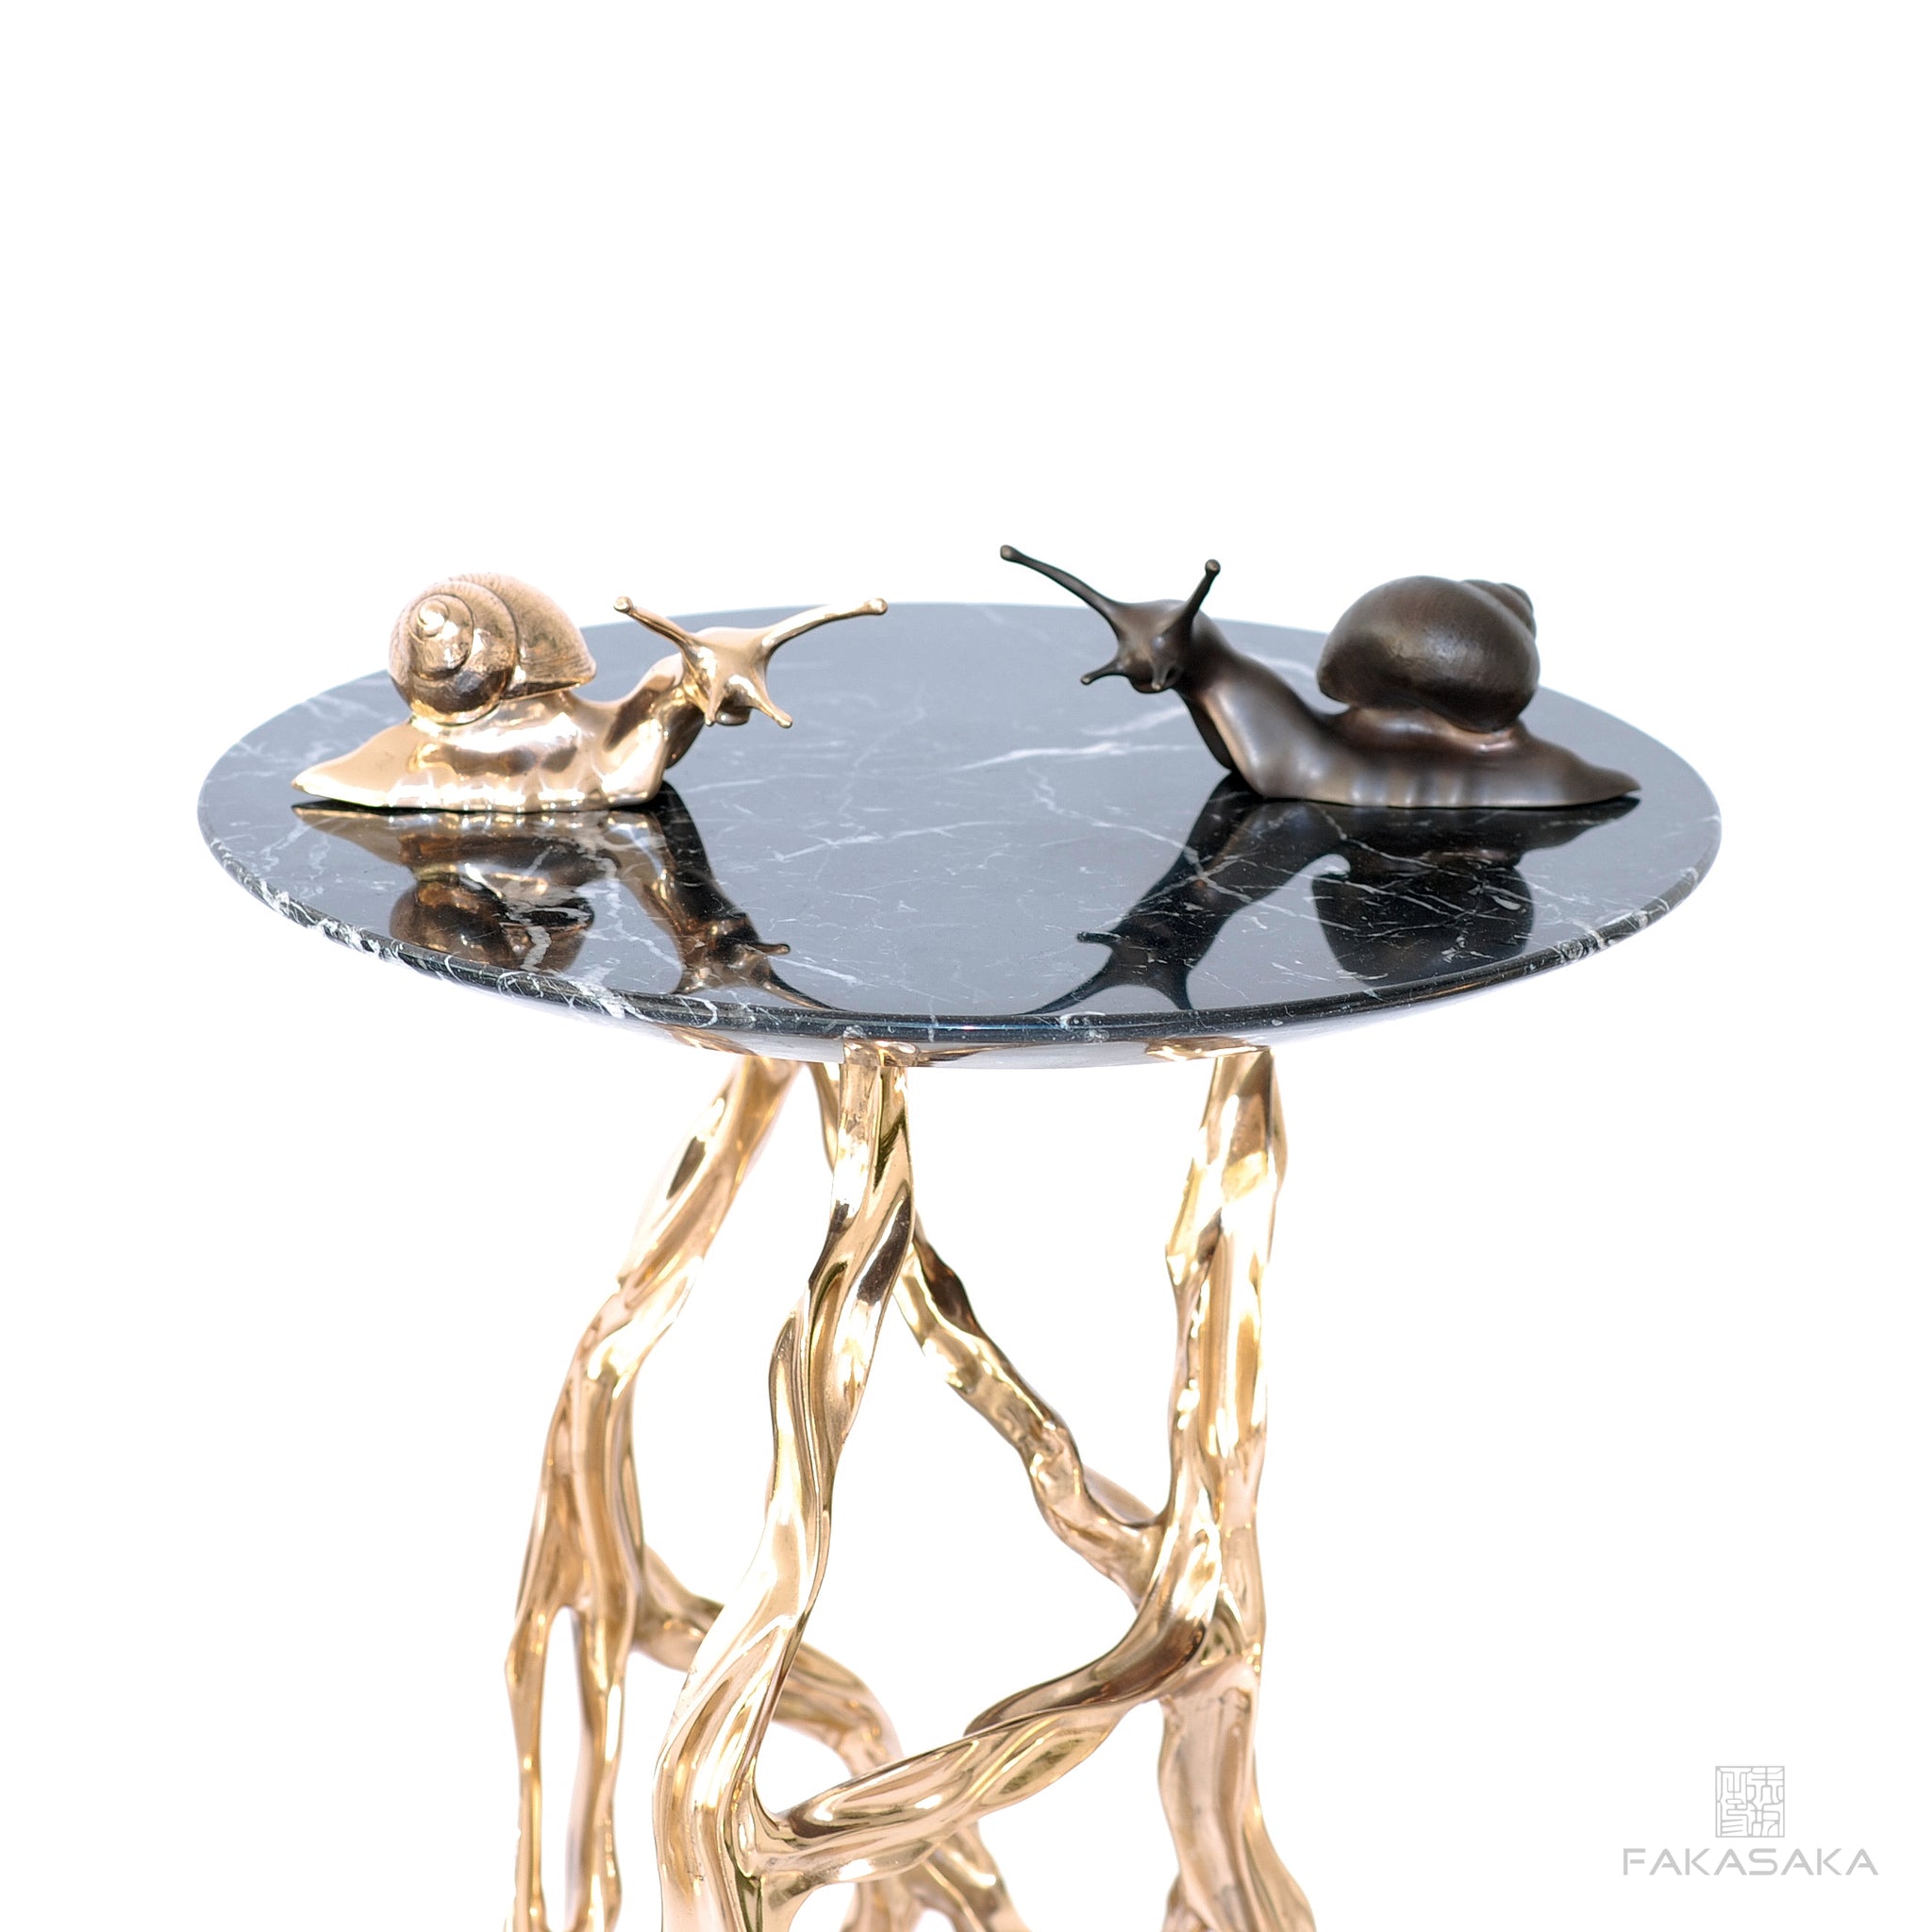 ALEXIA DRINK TABLE<br><br>TRANSLUCENT ONYX<br>BLACKBROWN BRONZE